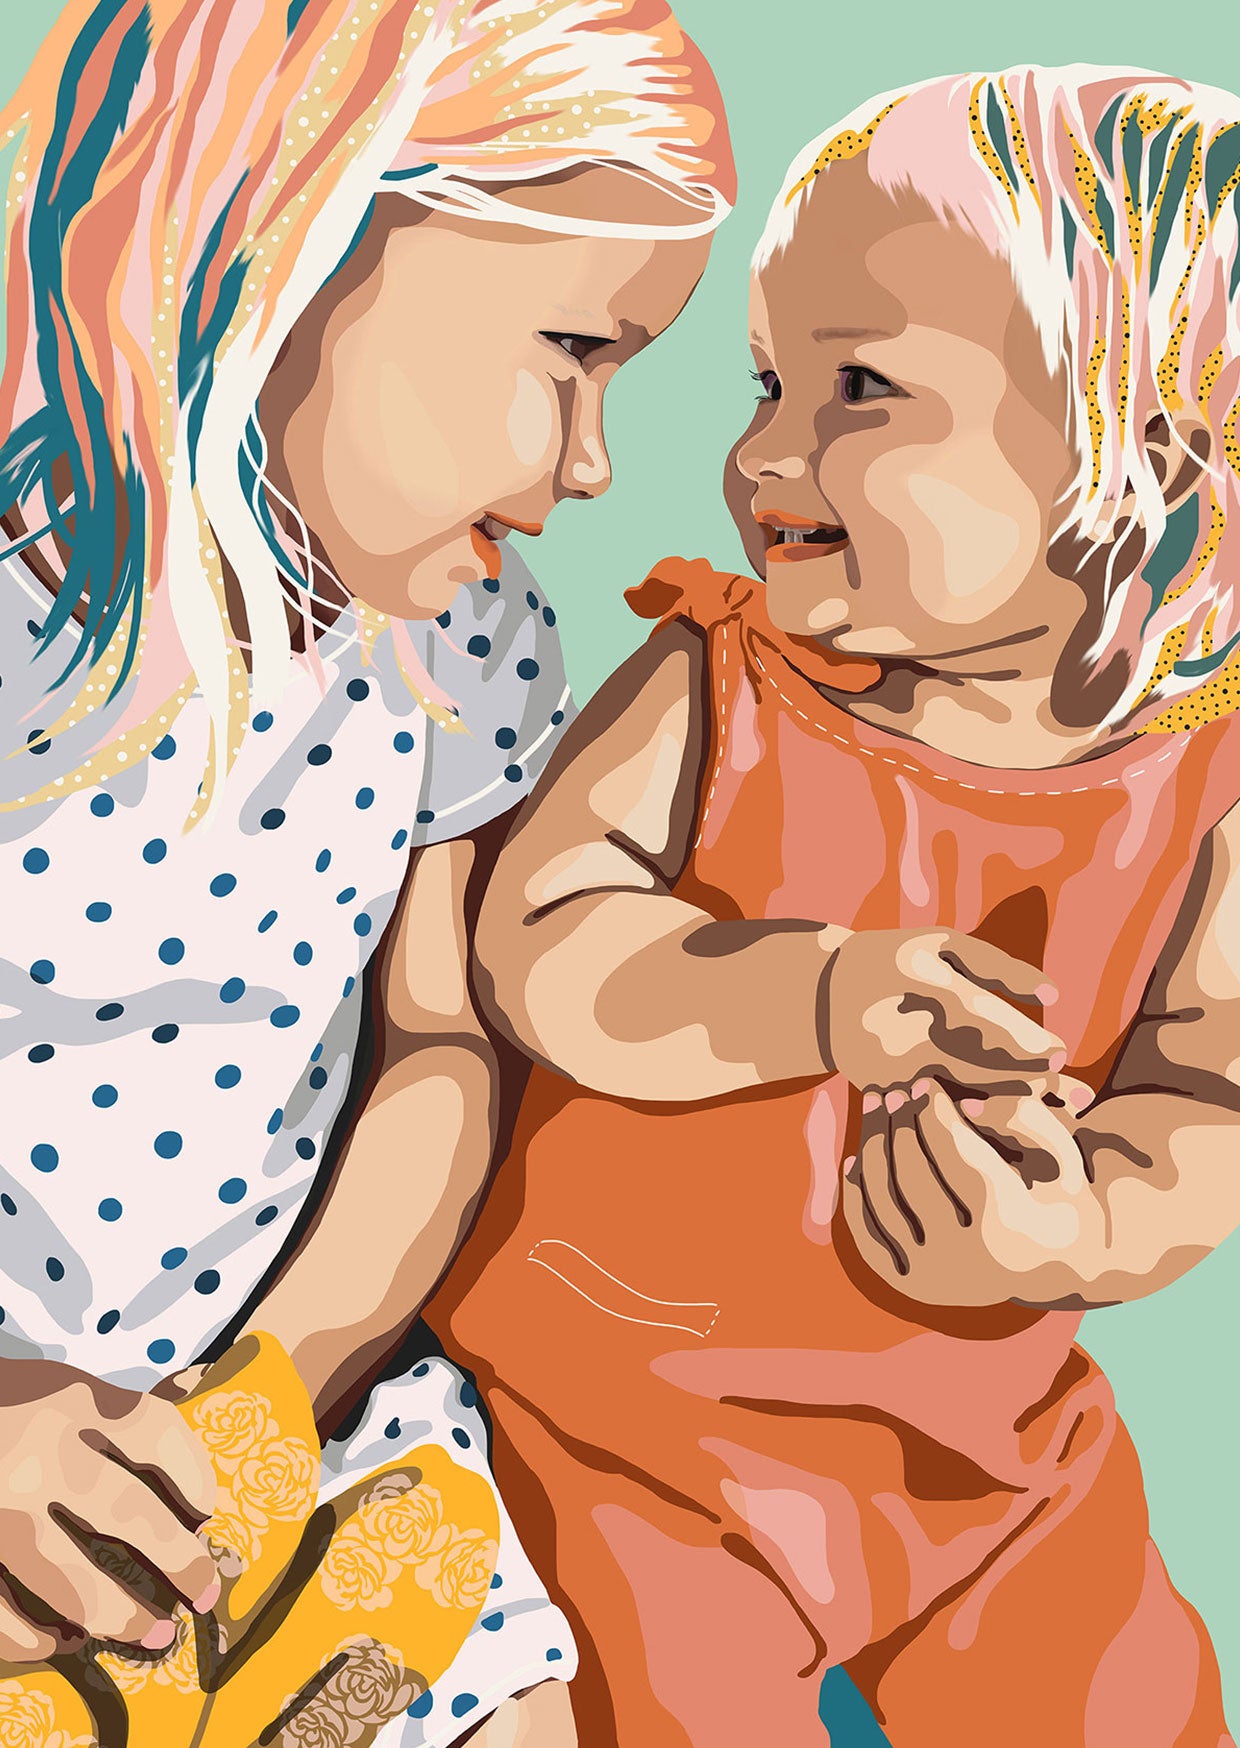 Digital portrait illustration of two young sisters